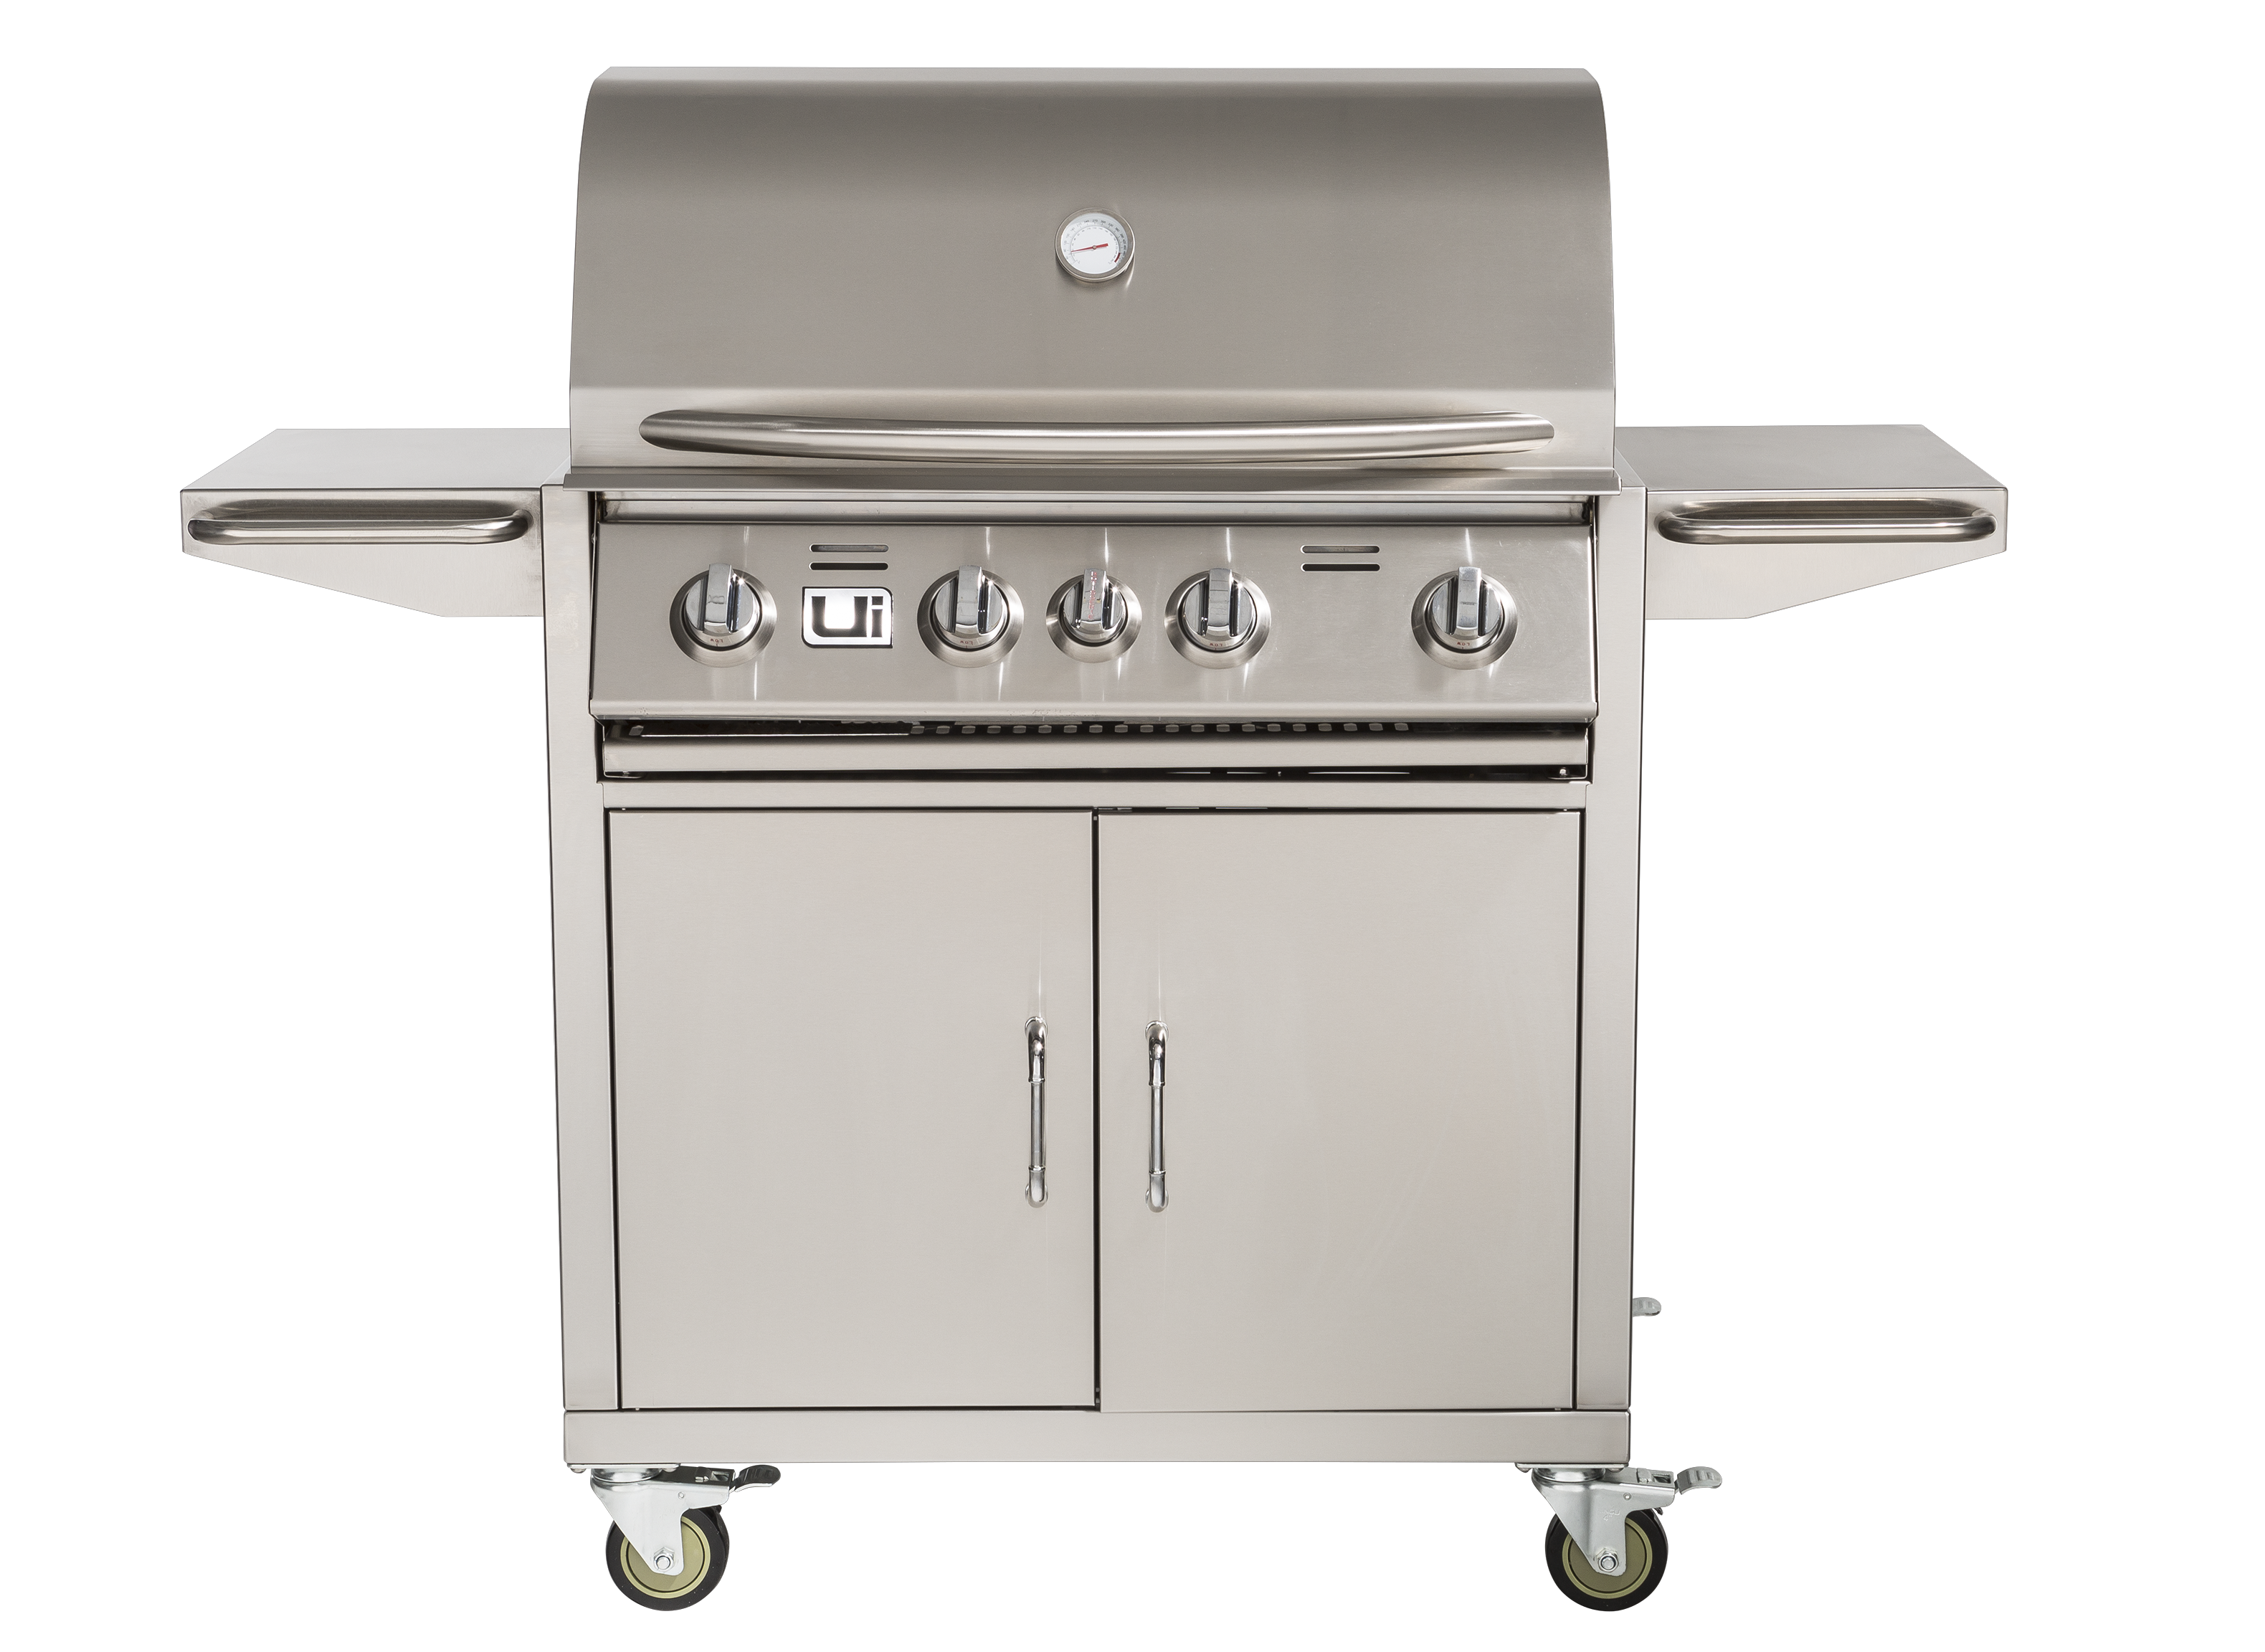 https://crdms.images.consumerreports.org/prod/products/cr/models/159172-midsize-gas-grills-room-for-18-to-28-burgers-urban-islands-4-burner-by-bull-costco-10004734.png